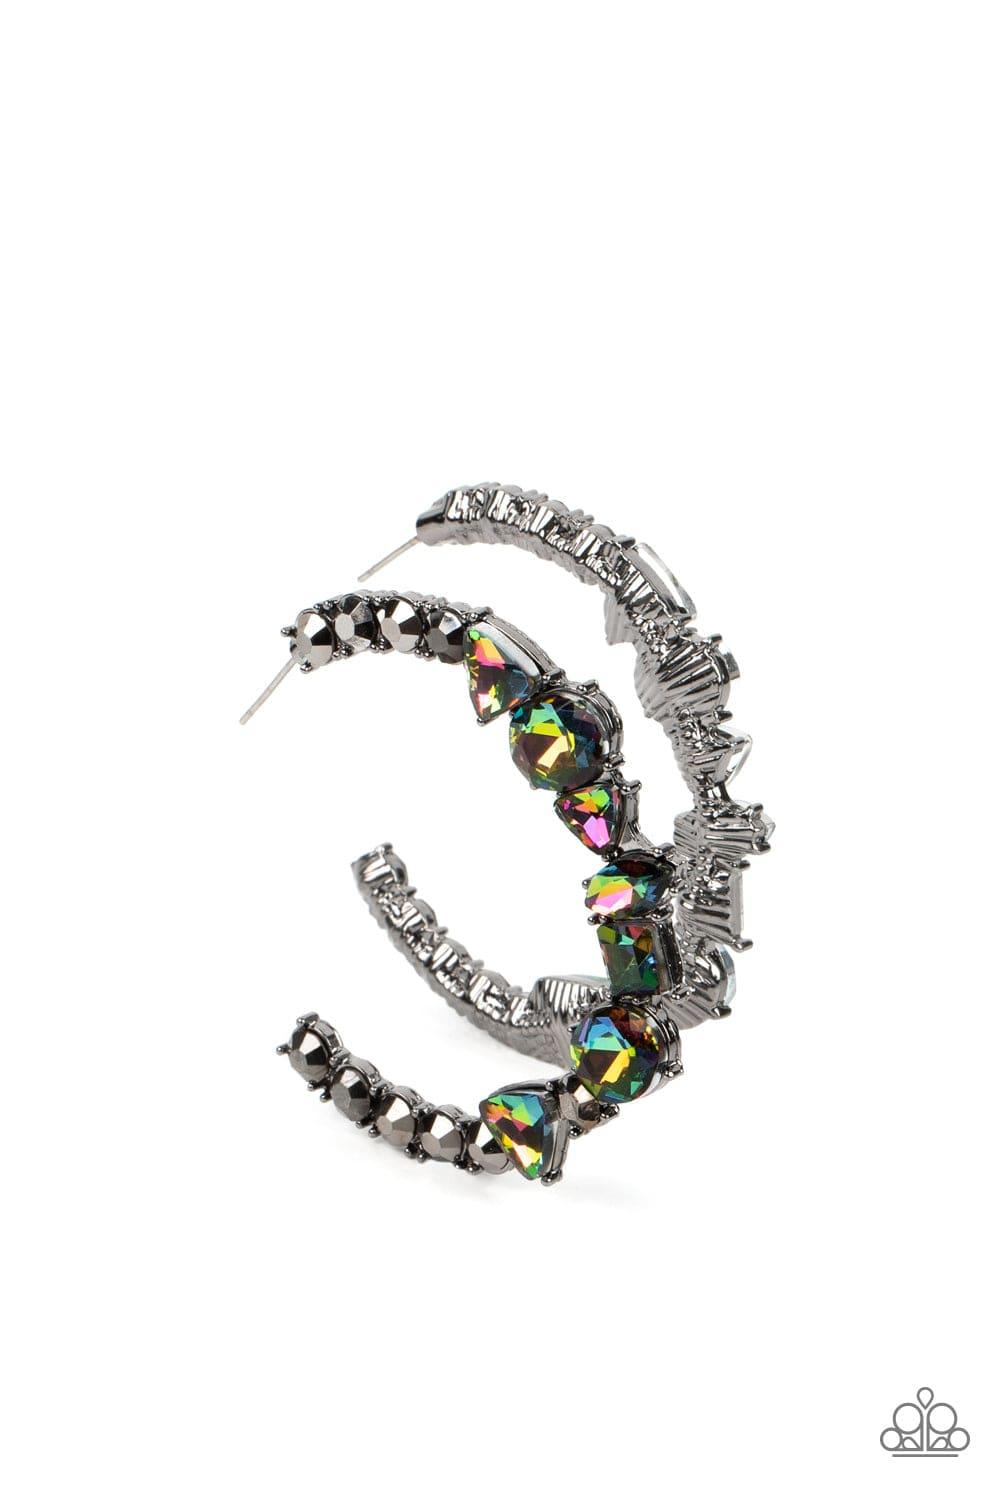 Paparazzi Accessories - New Age Nostalgia - Multicolor "oil-spill" Hoop Earrings - Bling by JessieK